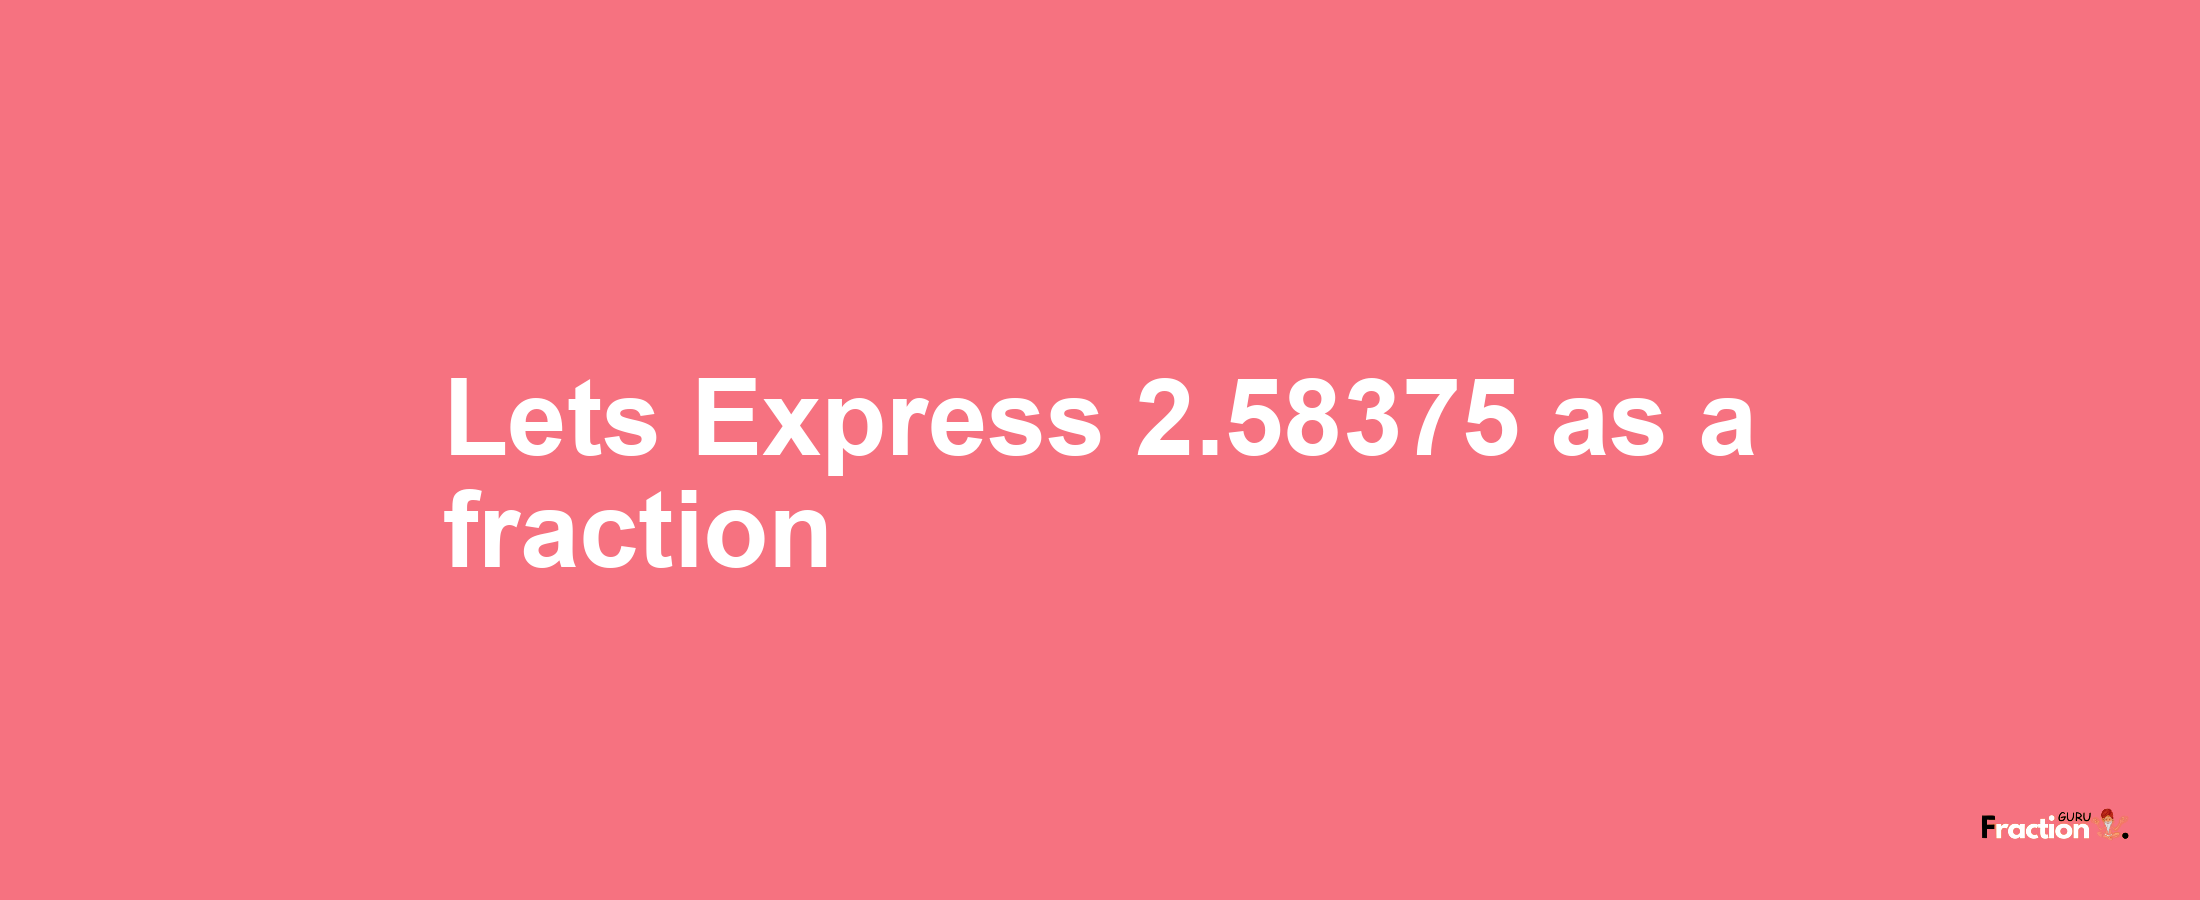 Lets Express 2.58375 as afraction